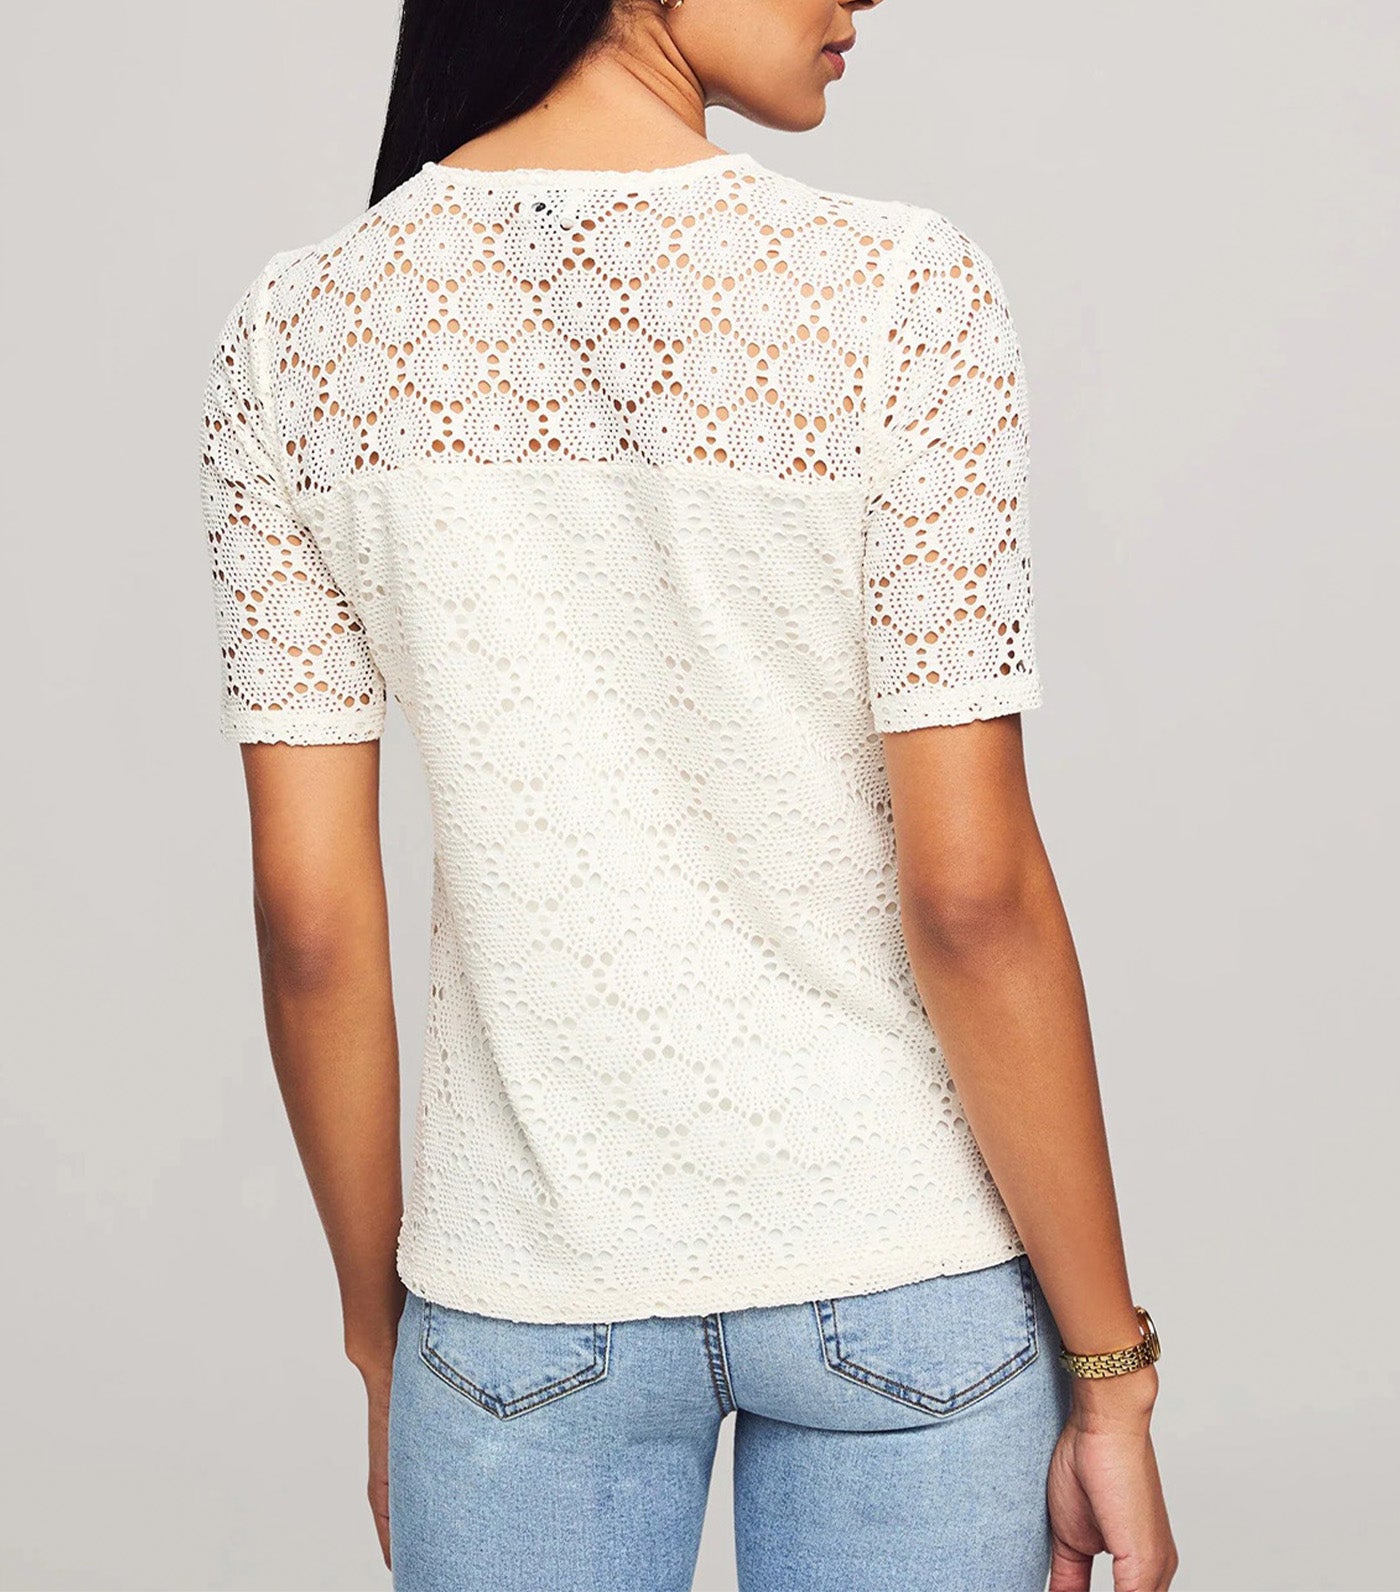 Lace Knit Elbow Sleeve Lace Tee Anne White